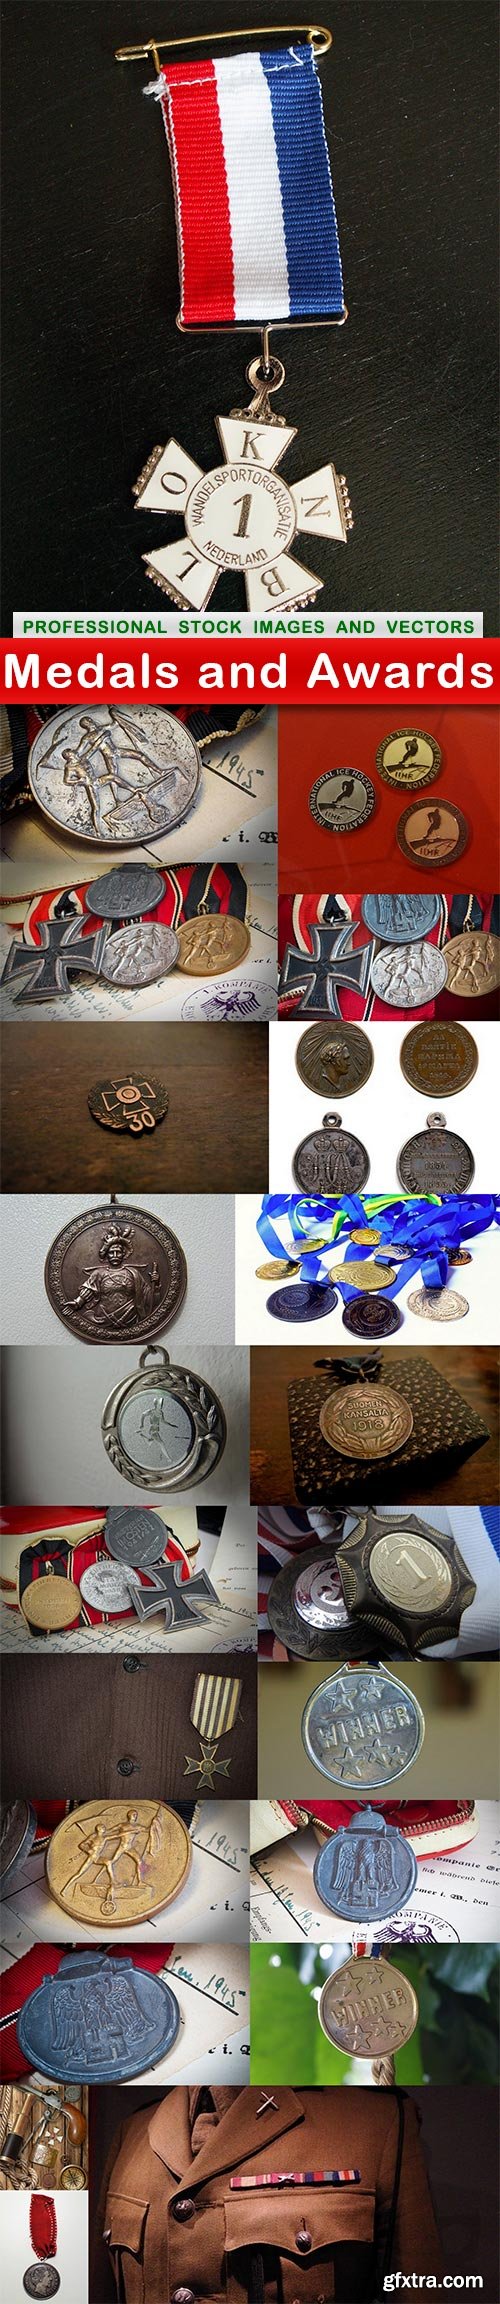 Medals and Awards - 22 UHQ JPEG